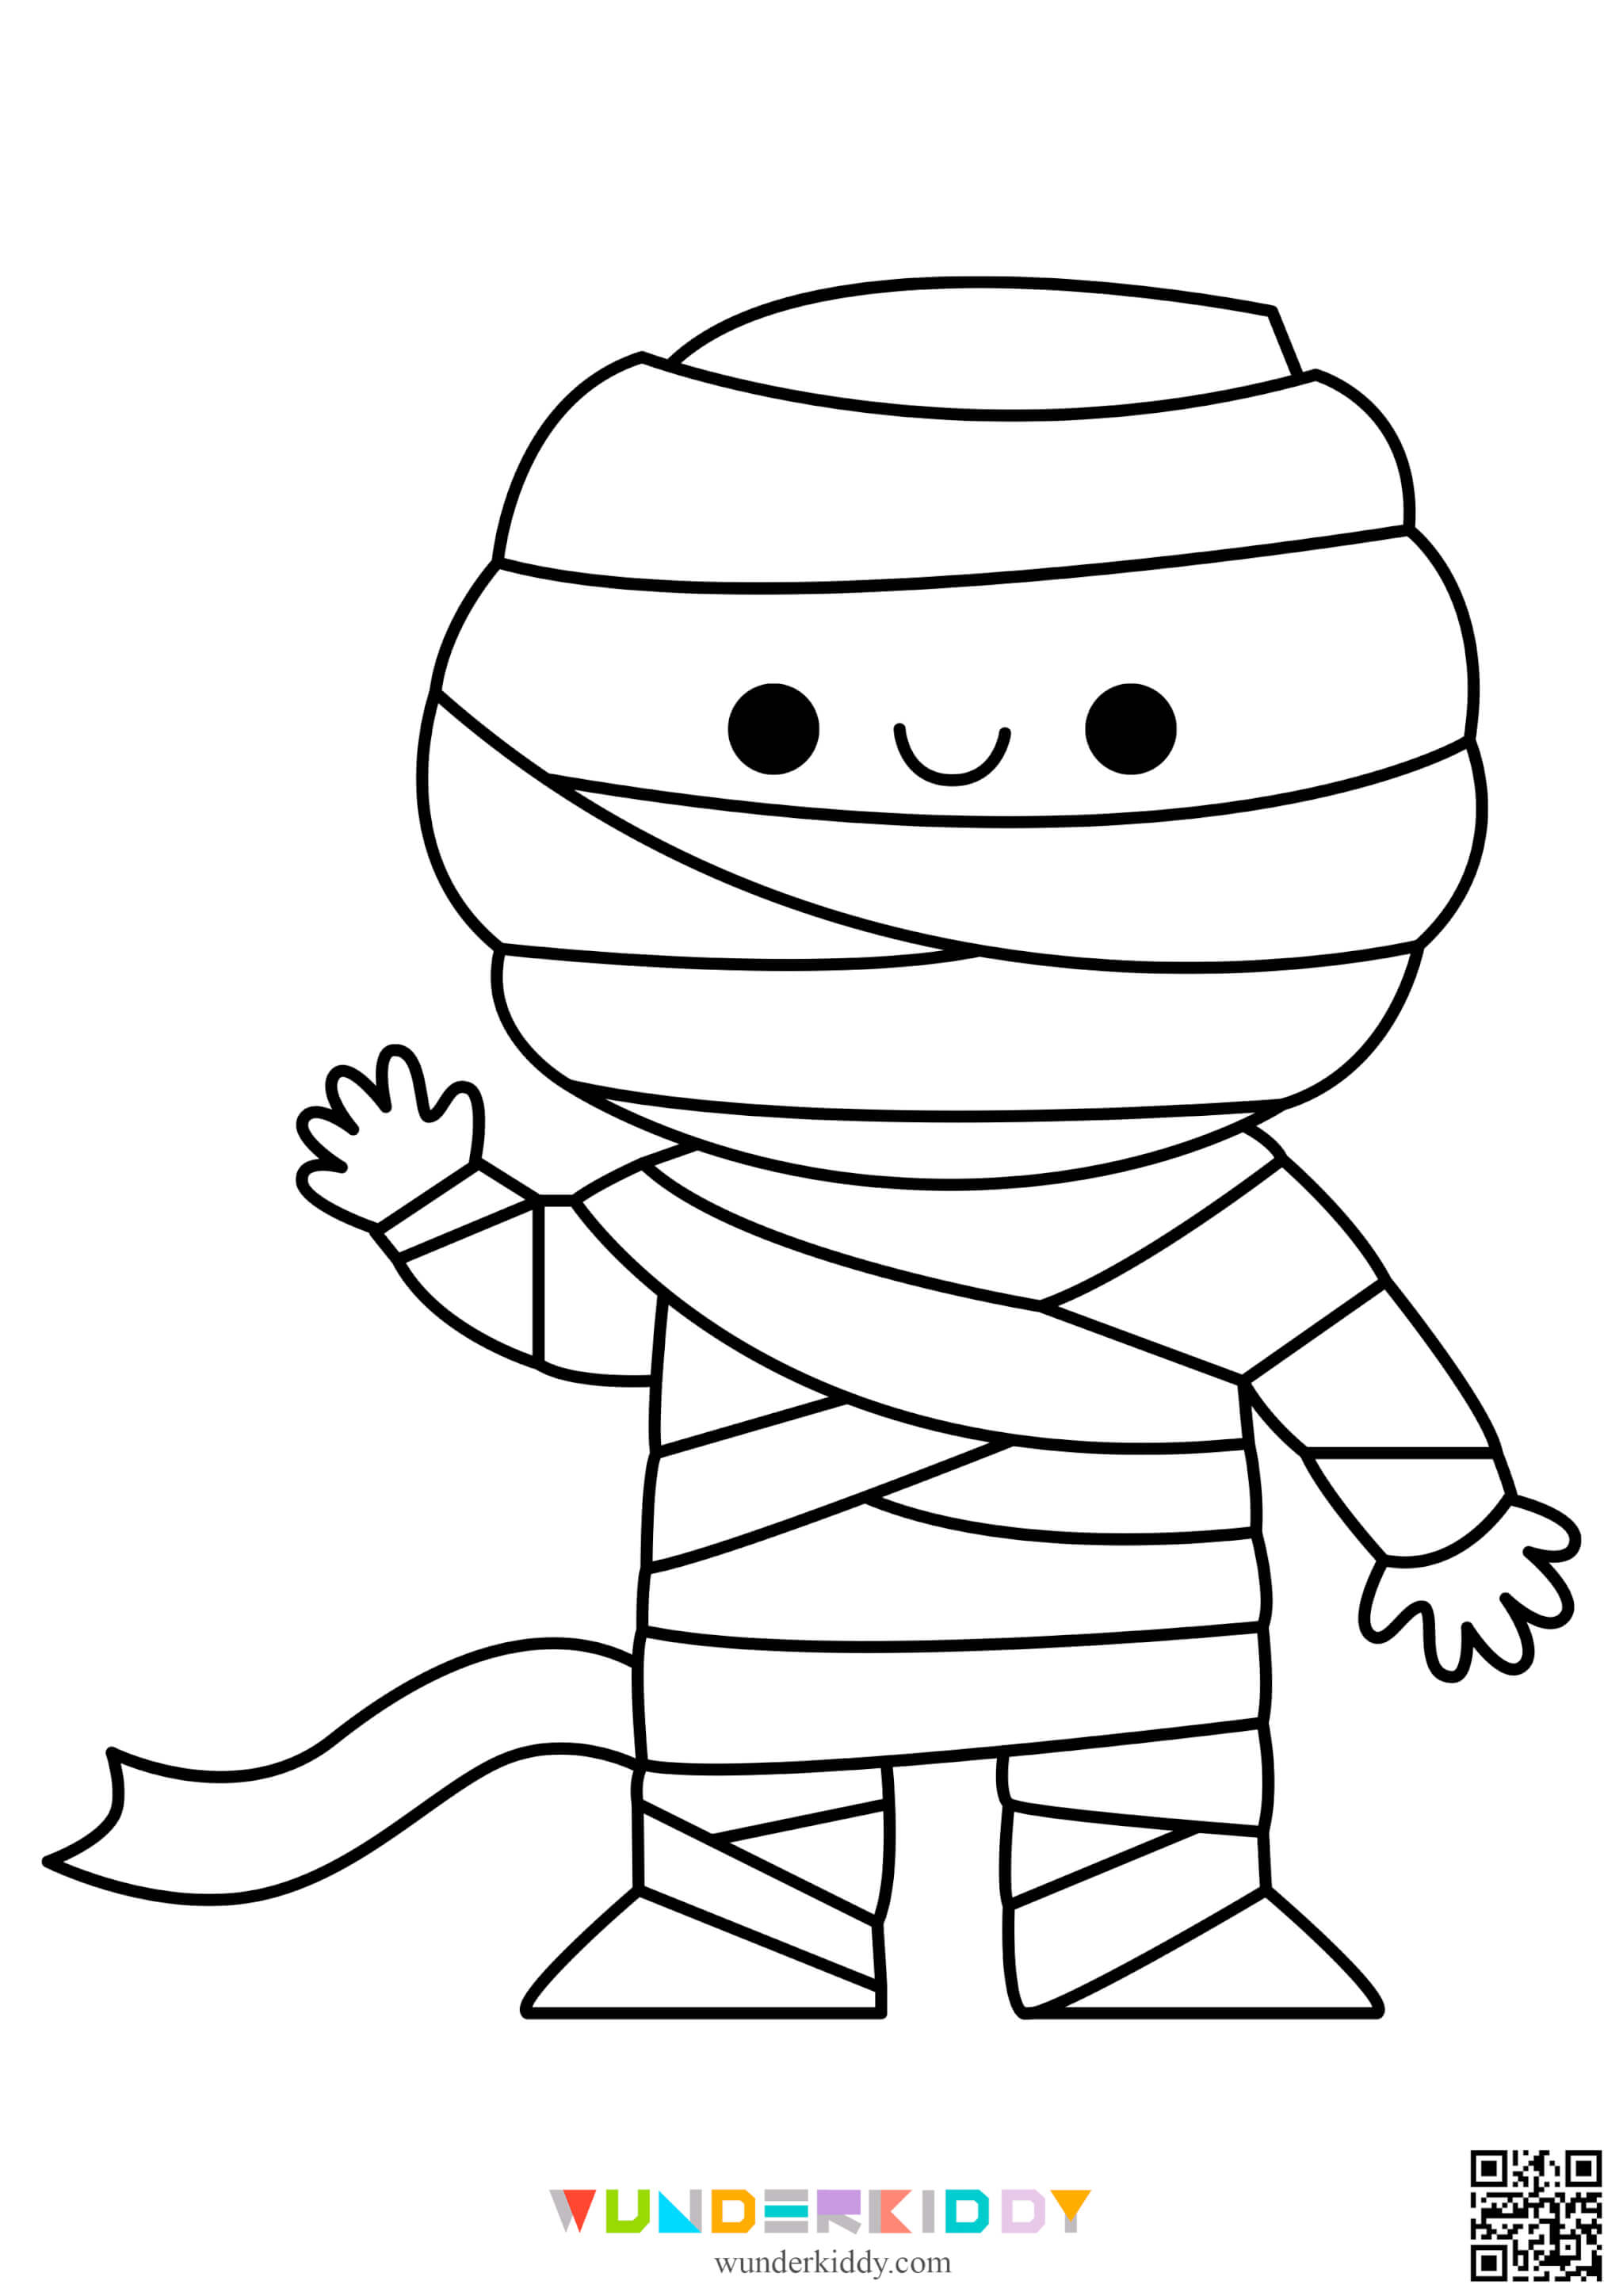 Halloween Coloring Pages - Image 5